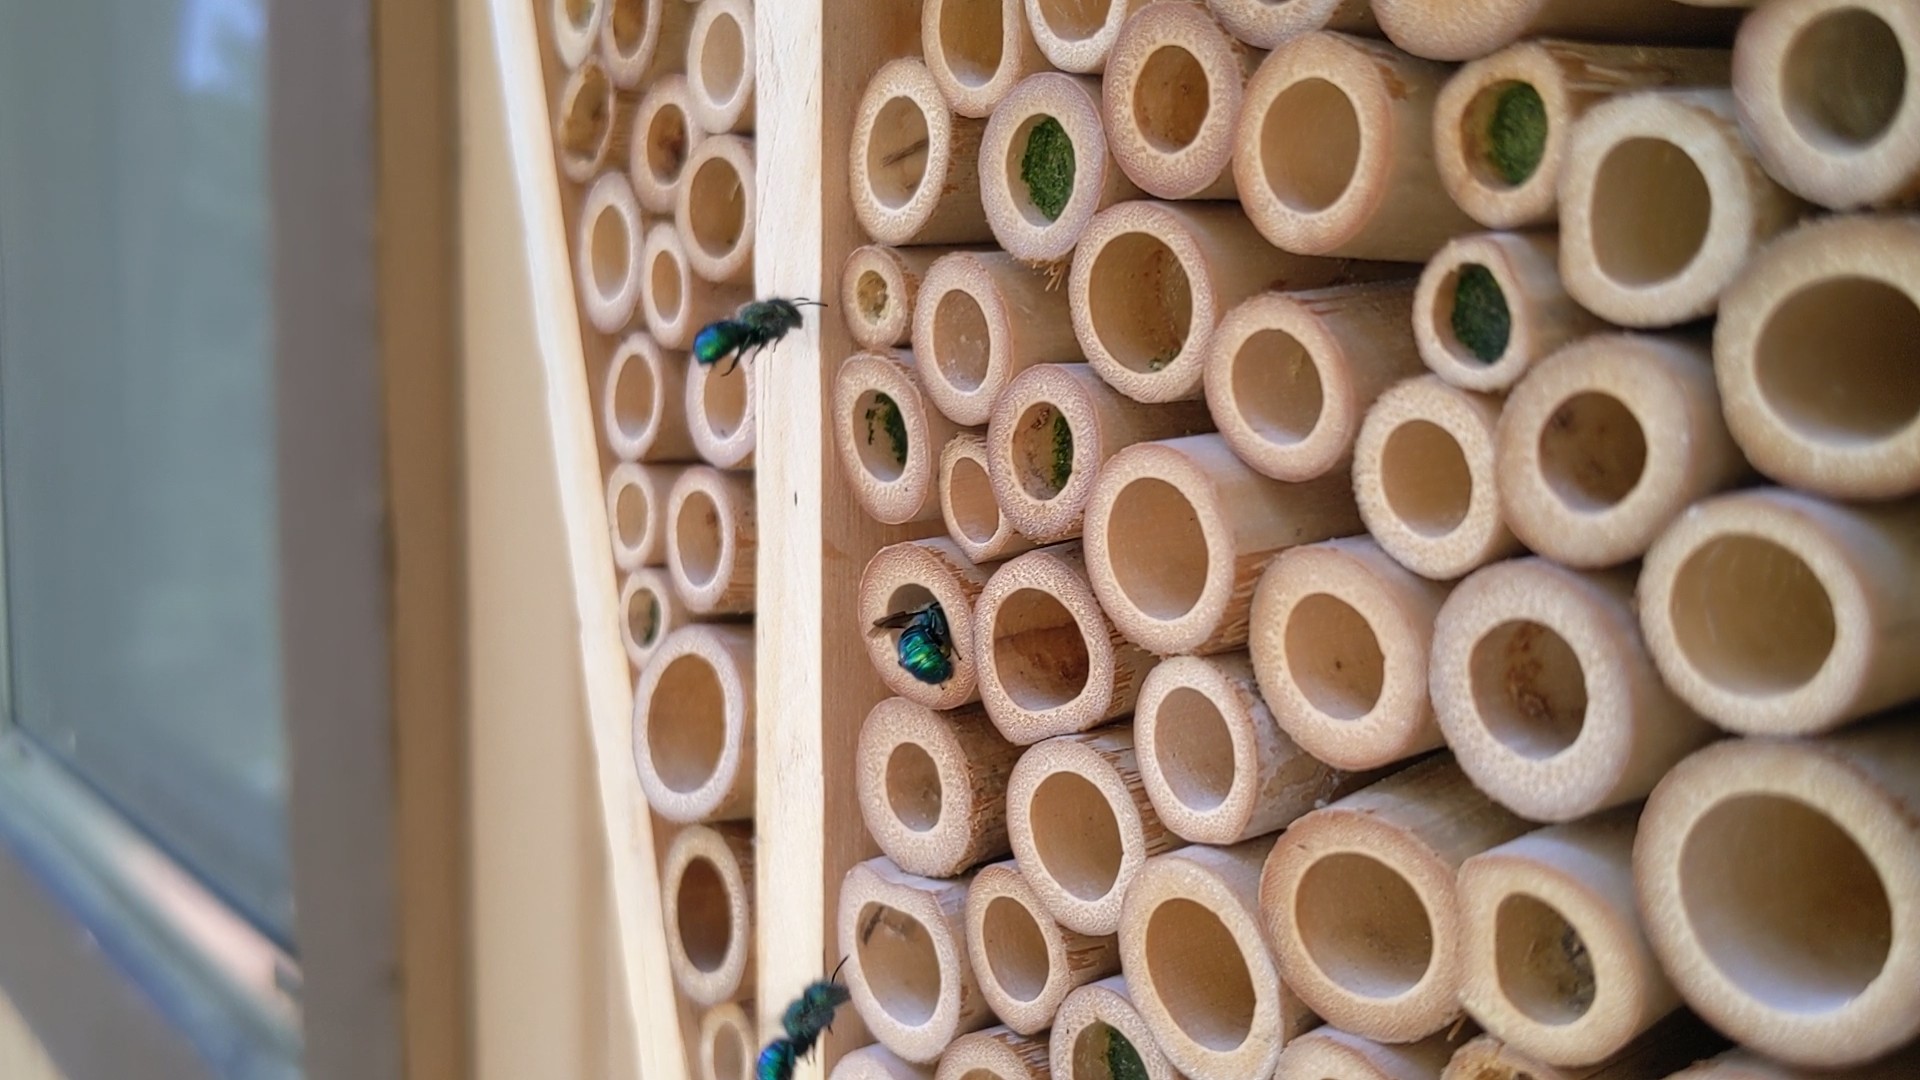 Native bee nesting house with active mason bees.